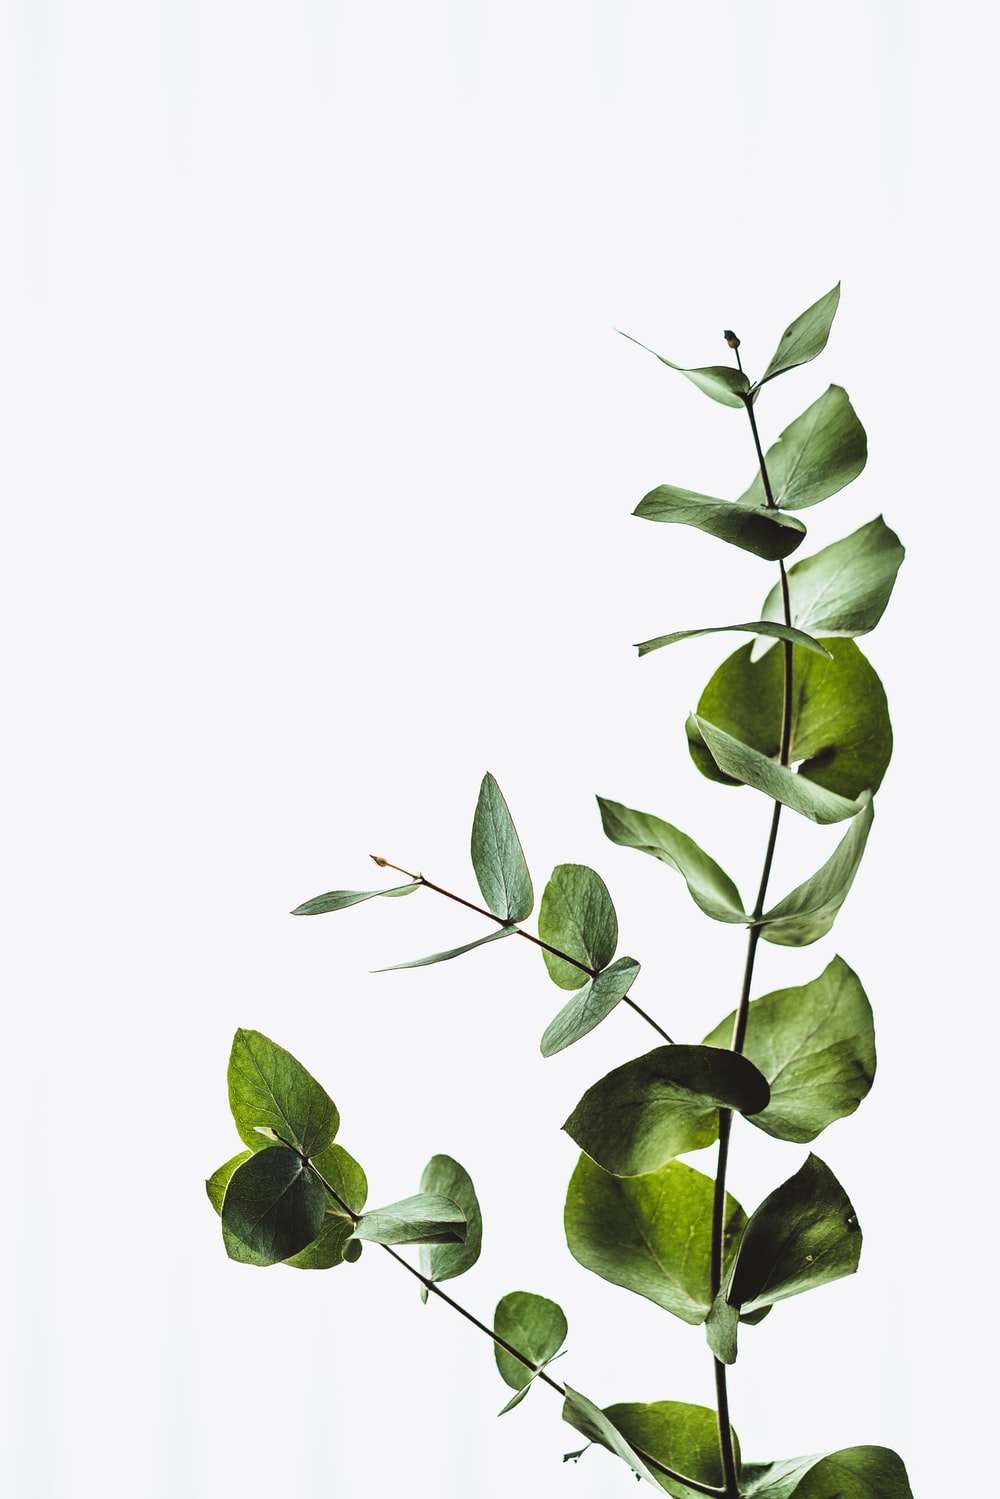 Eucalyptus Leaves Picture. Download Free Image